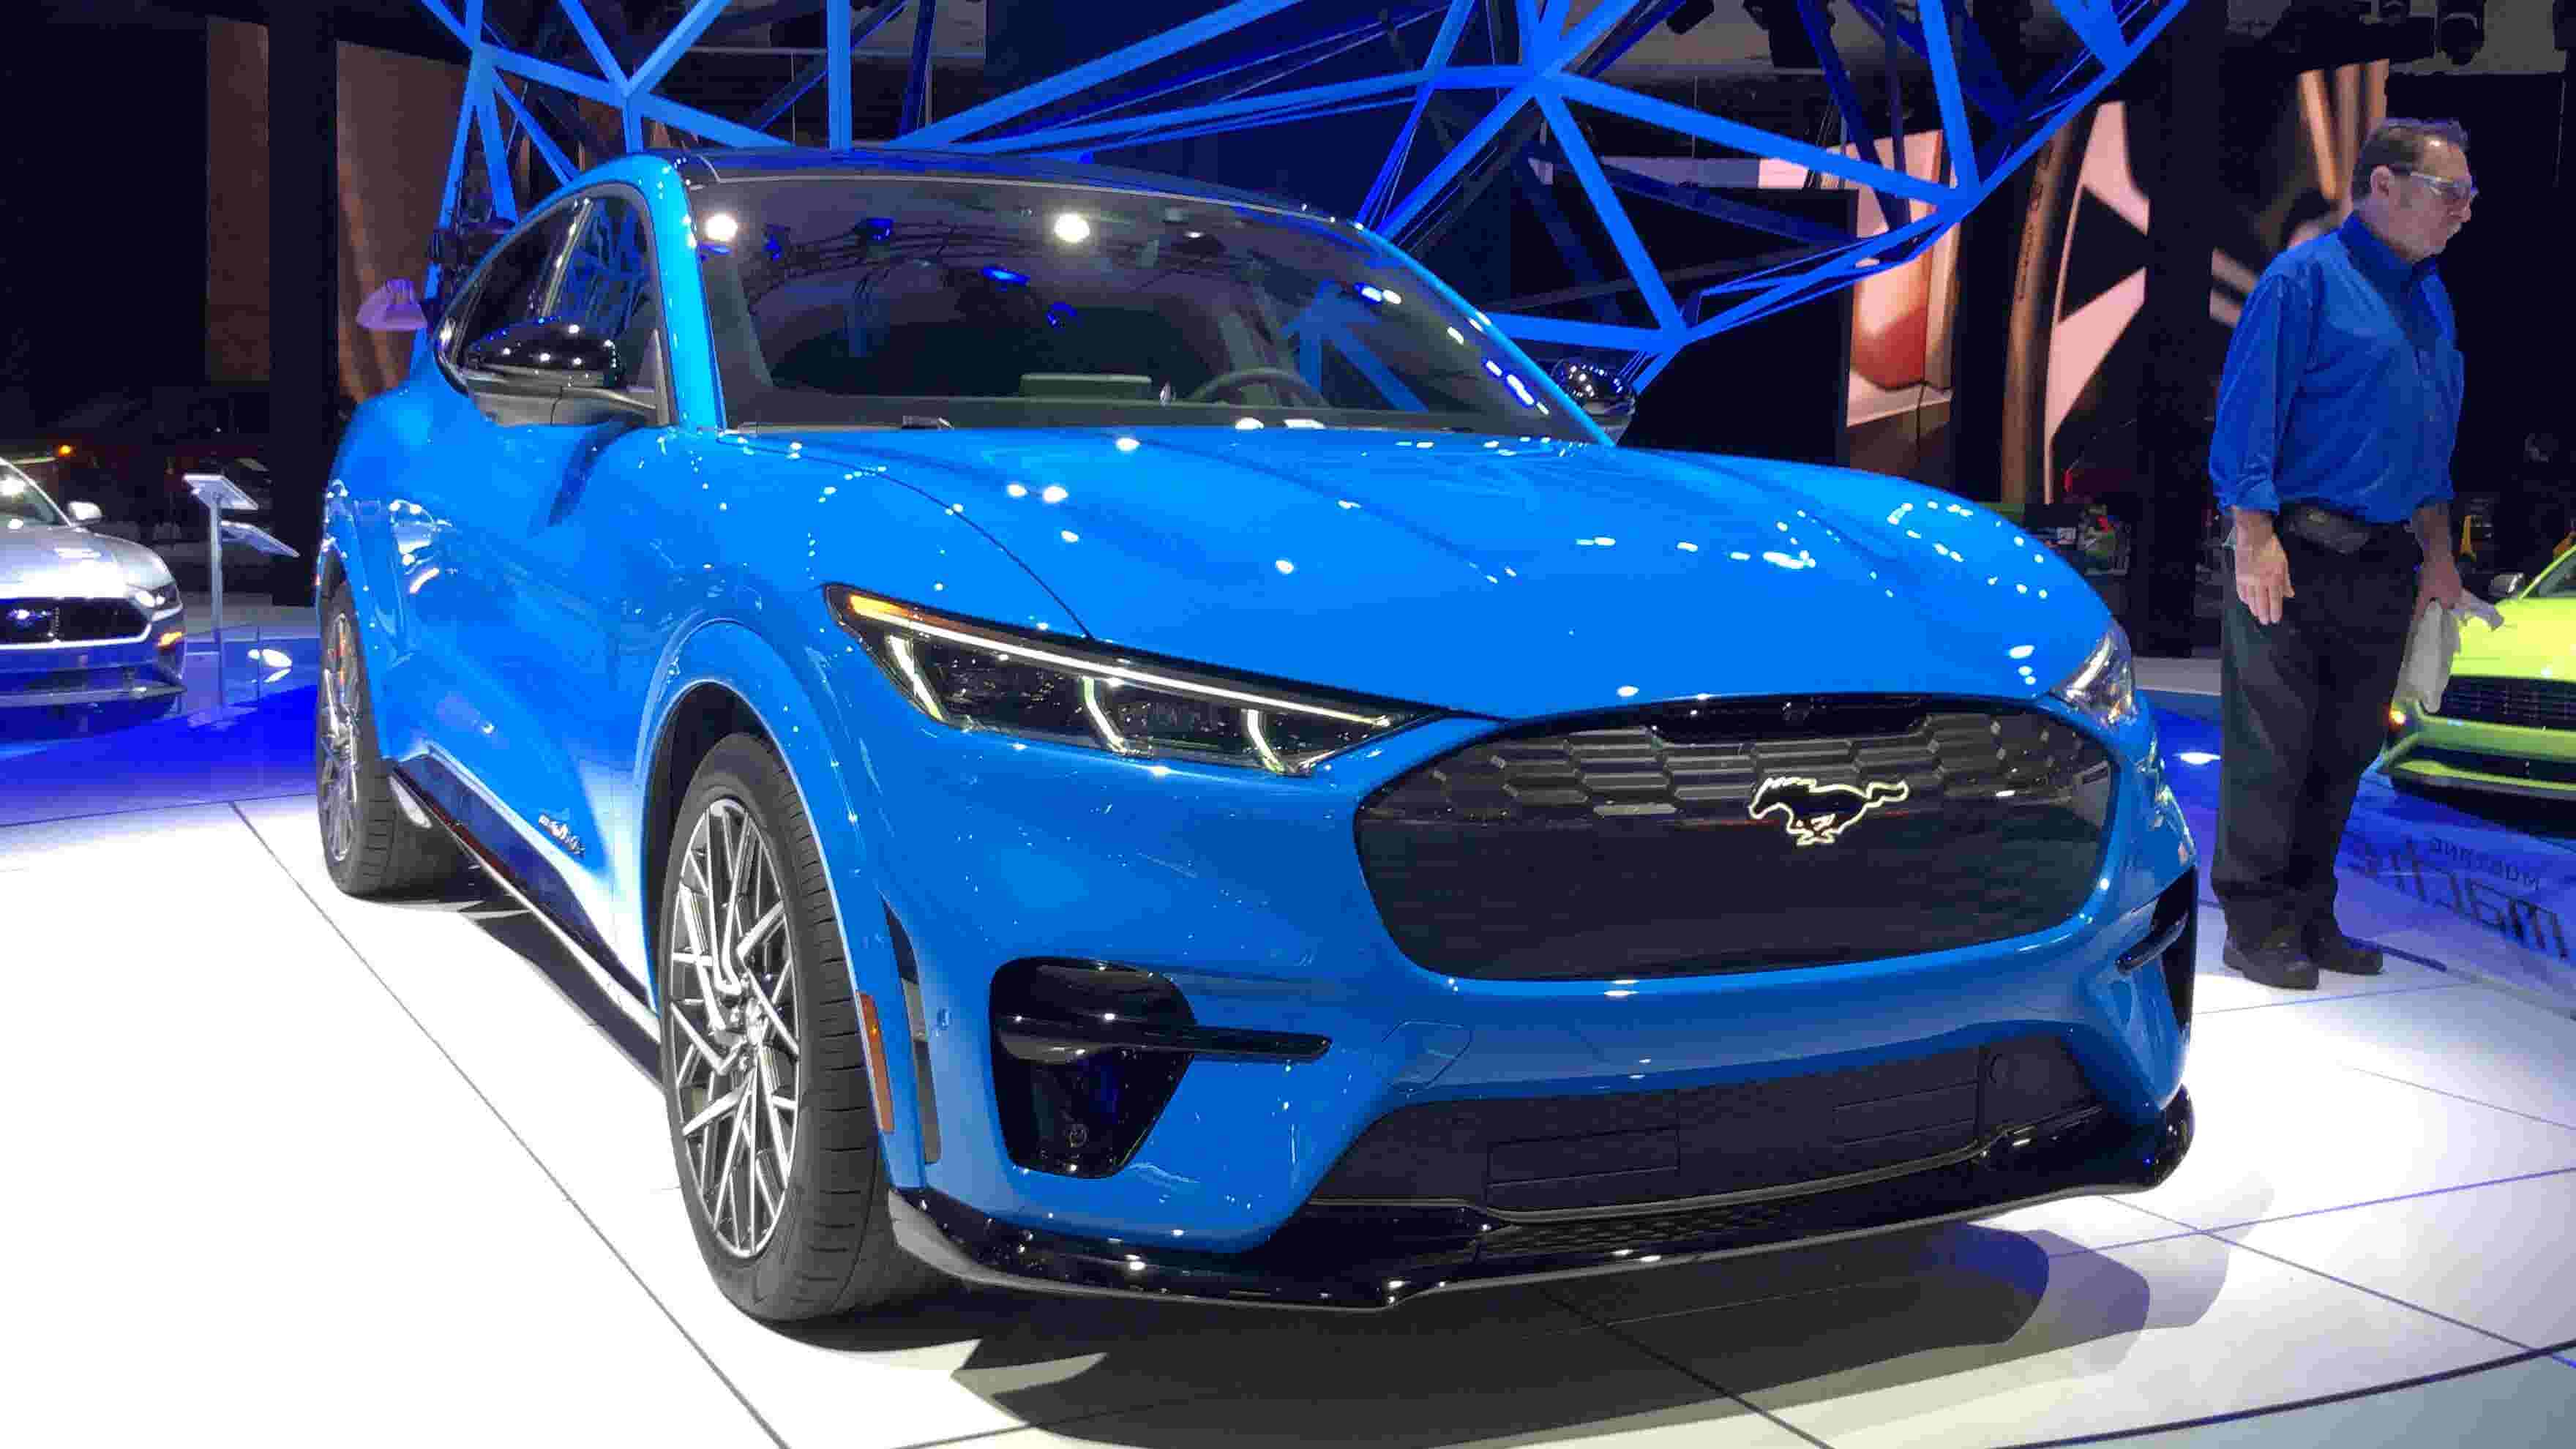 SUVs and electric power star at the Los Angeles auto show - Flipboard